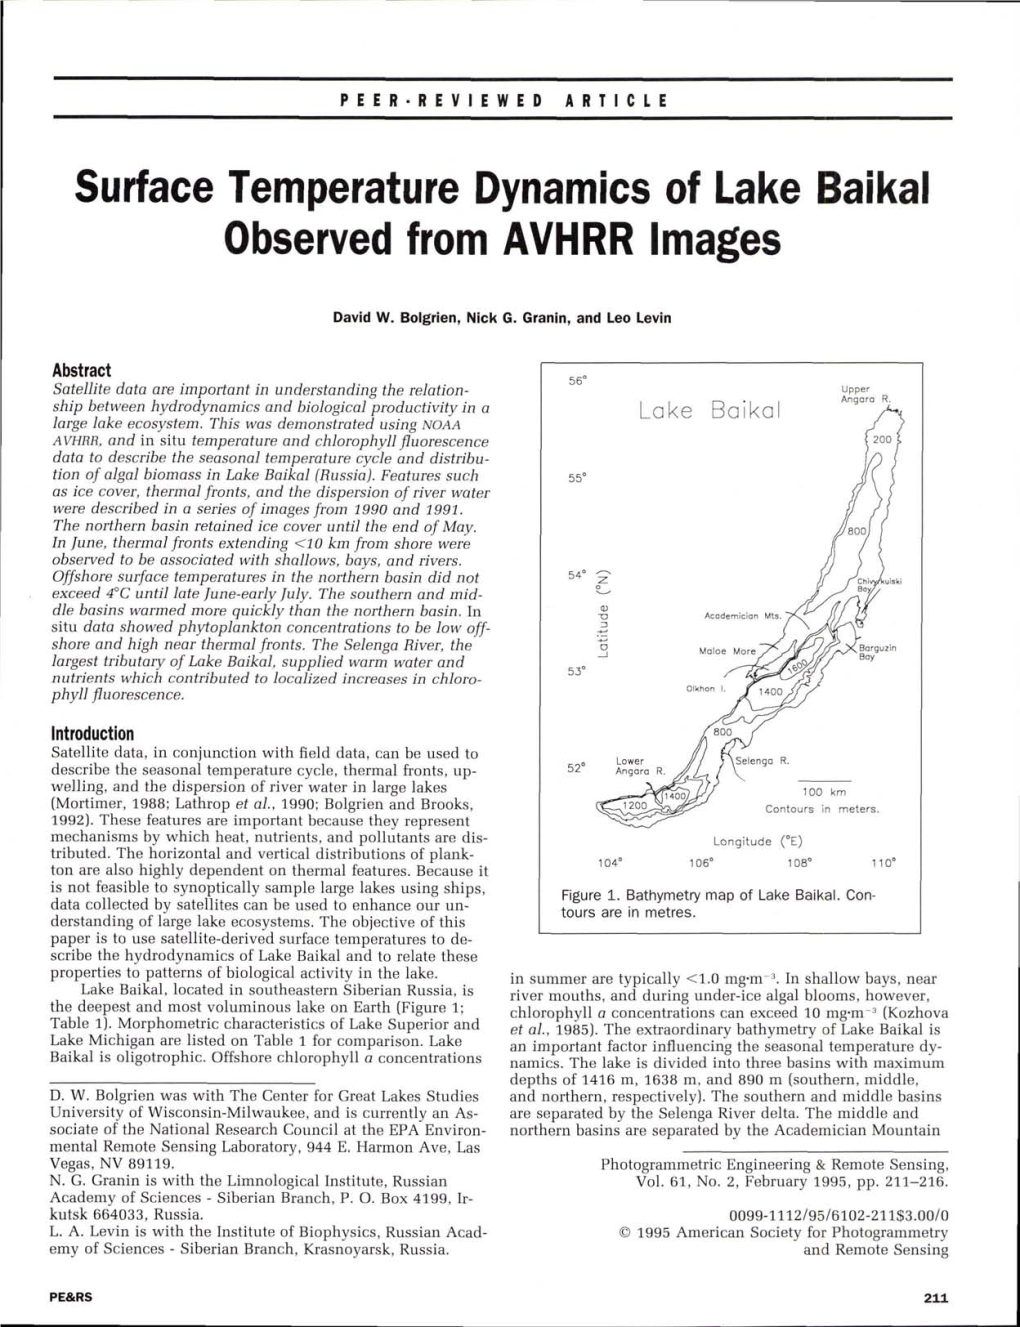 Surface Temprature Dynamics of Lake Baikal Observed from AVHRR